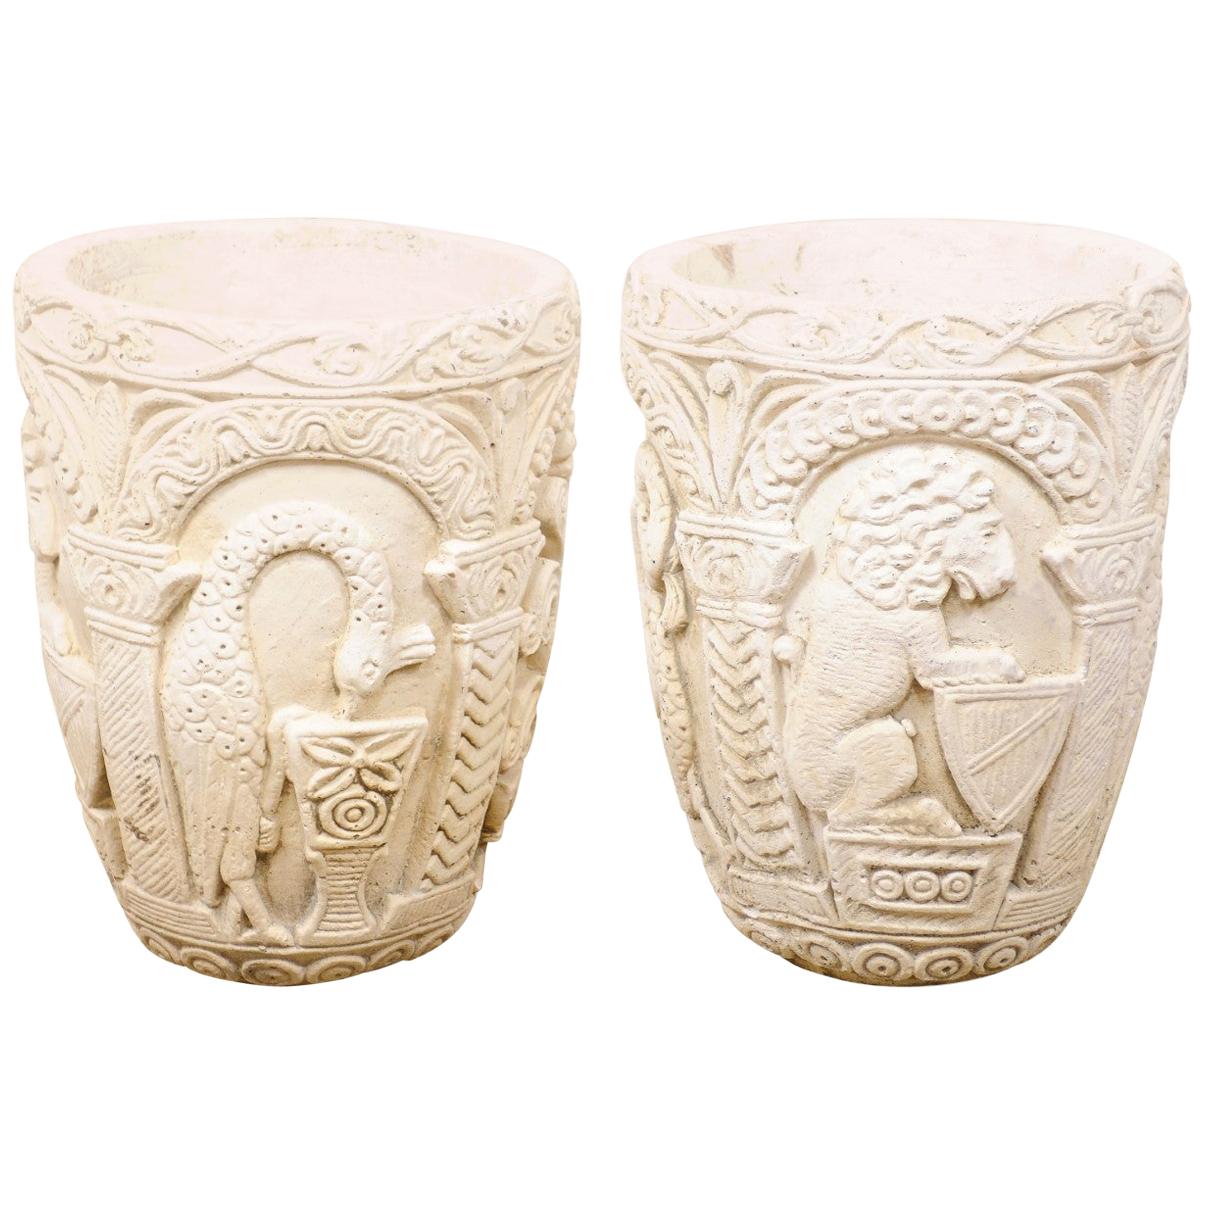 Pair of Mizner-Style Richly Decorated Cast-Stone Planters, 2+ Ft Tall